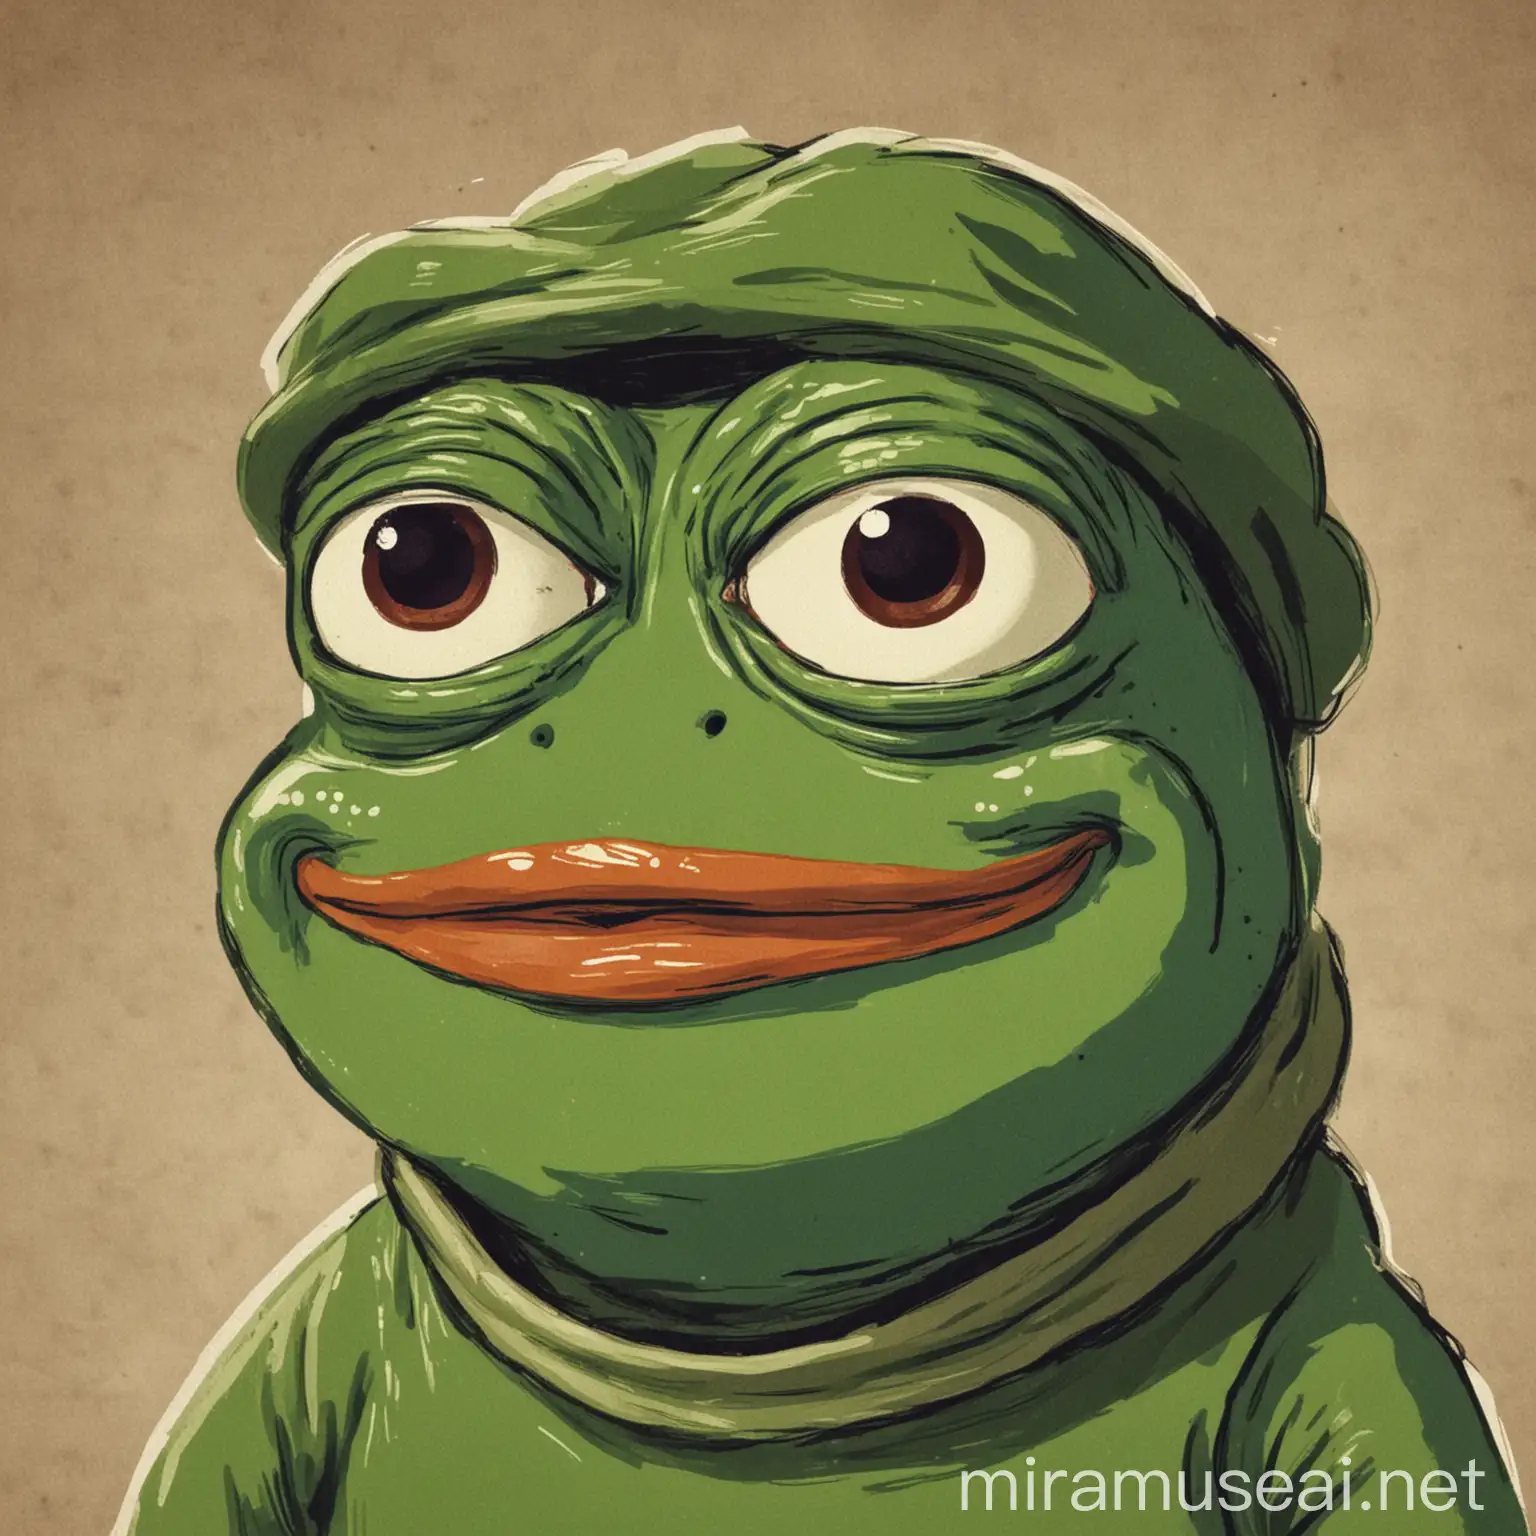 Can you make an illustation of pepe the frog